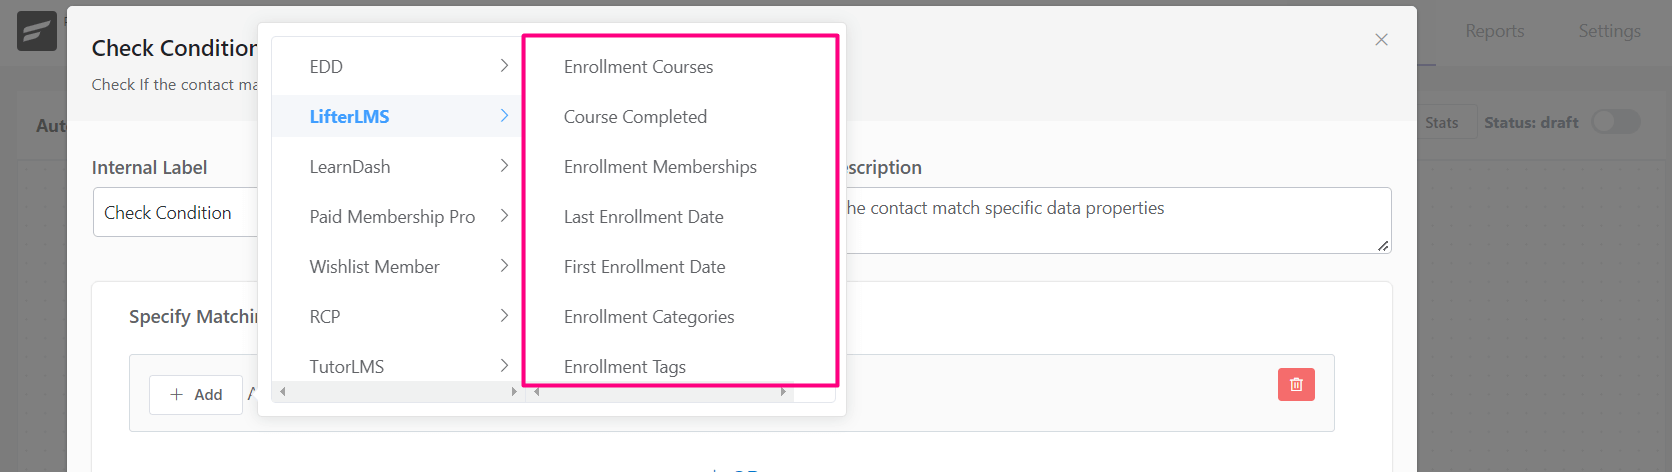 crm action conditional lifterlms